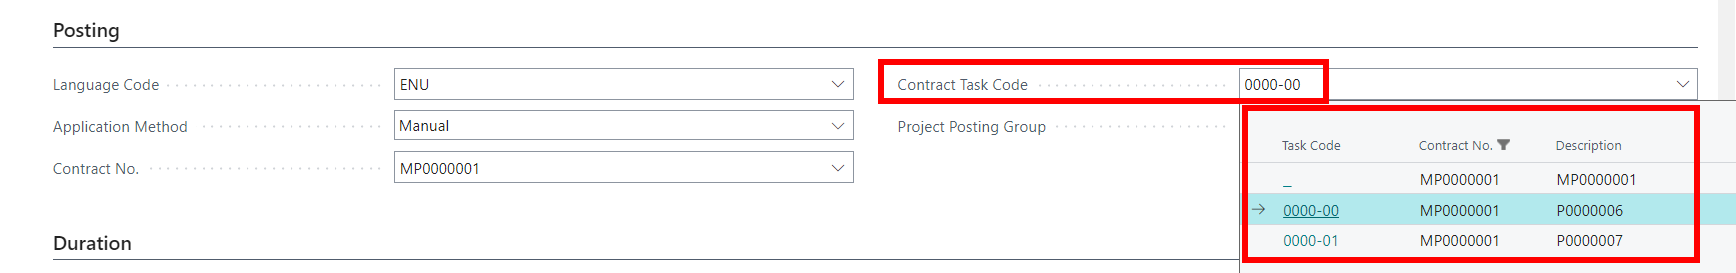 Project Card - Contract Task Code